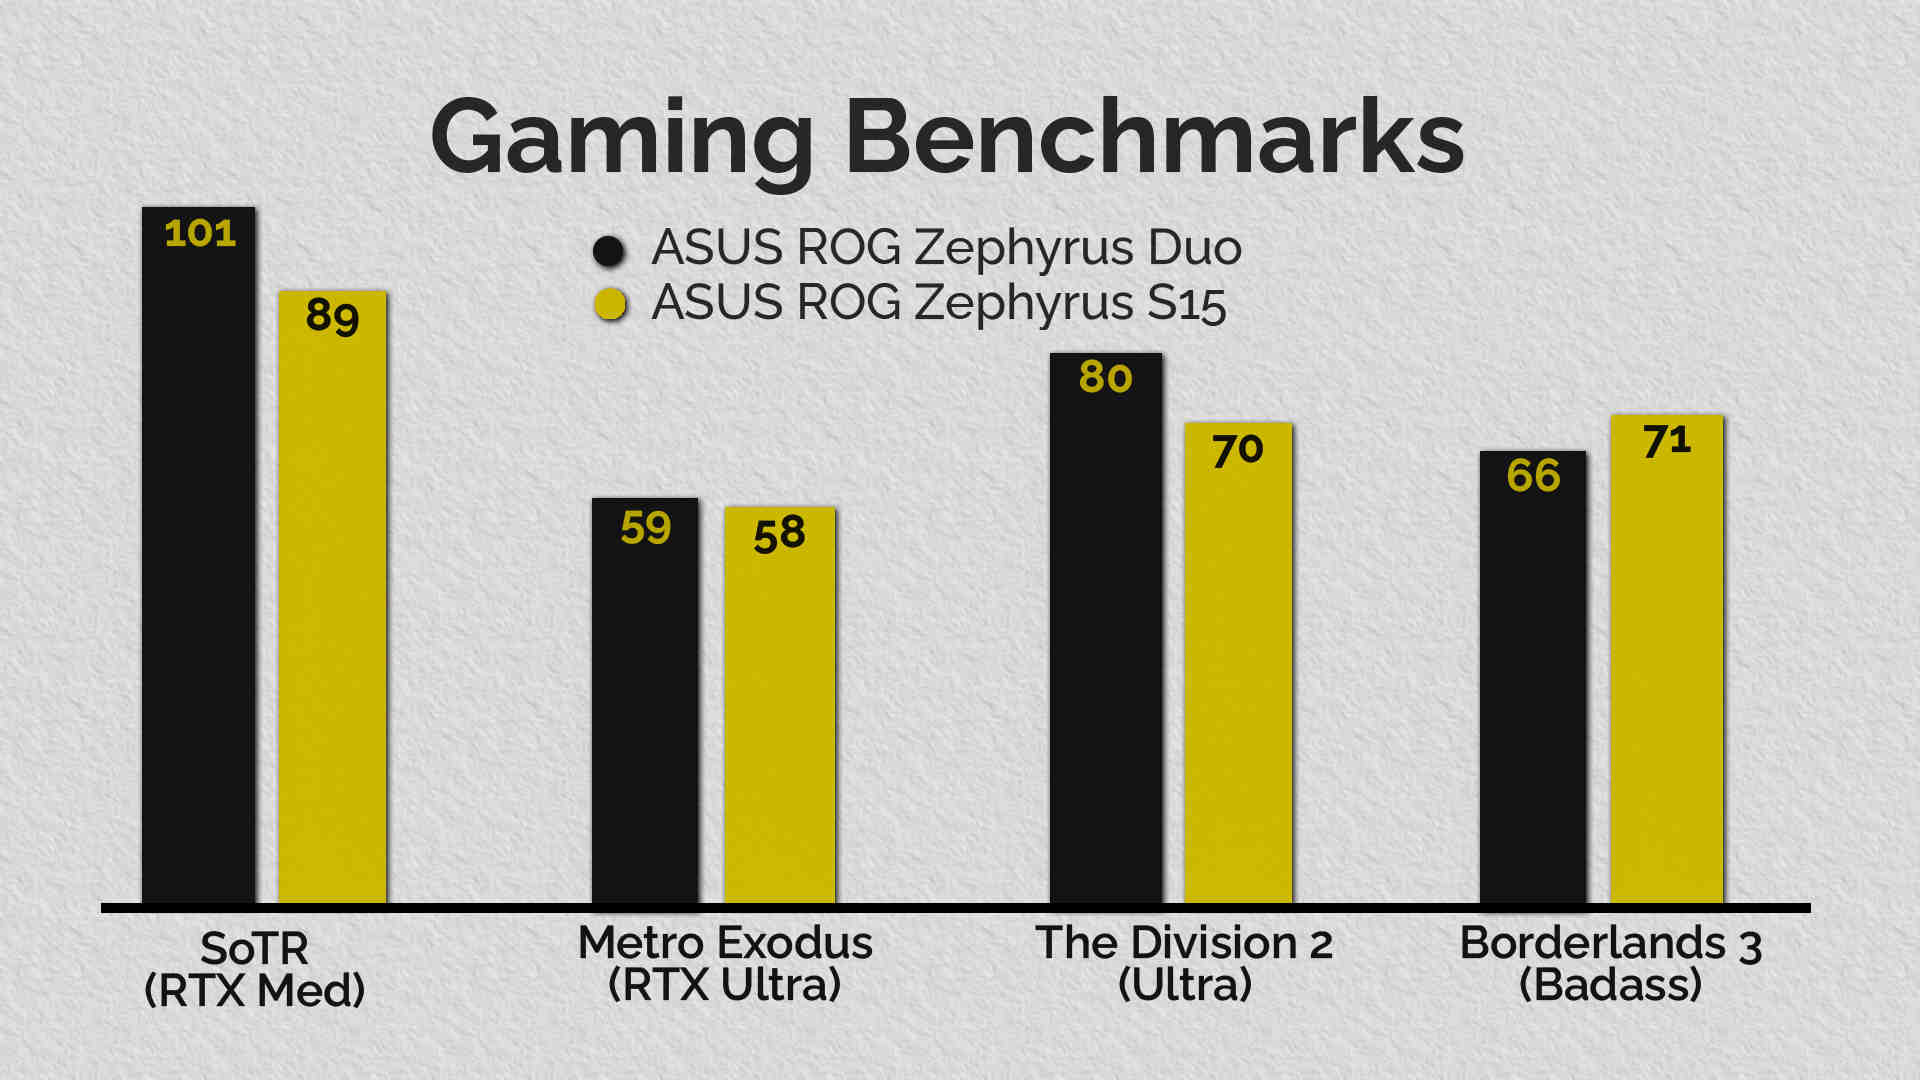 Despite packing in a slower GPU than on the S15, the Duo’s better cooling allows its 2070 Super Max-Q GPU to stretch its legs a bit more, making up for the performance deficit in most cases. (Data in frames per second). Image: Anirudh Regidi